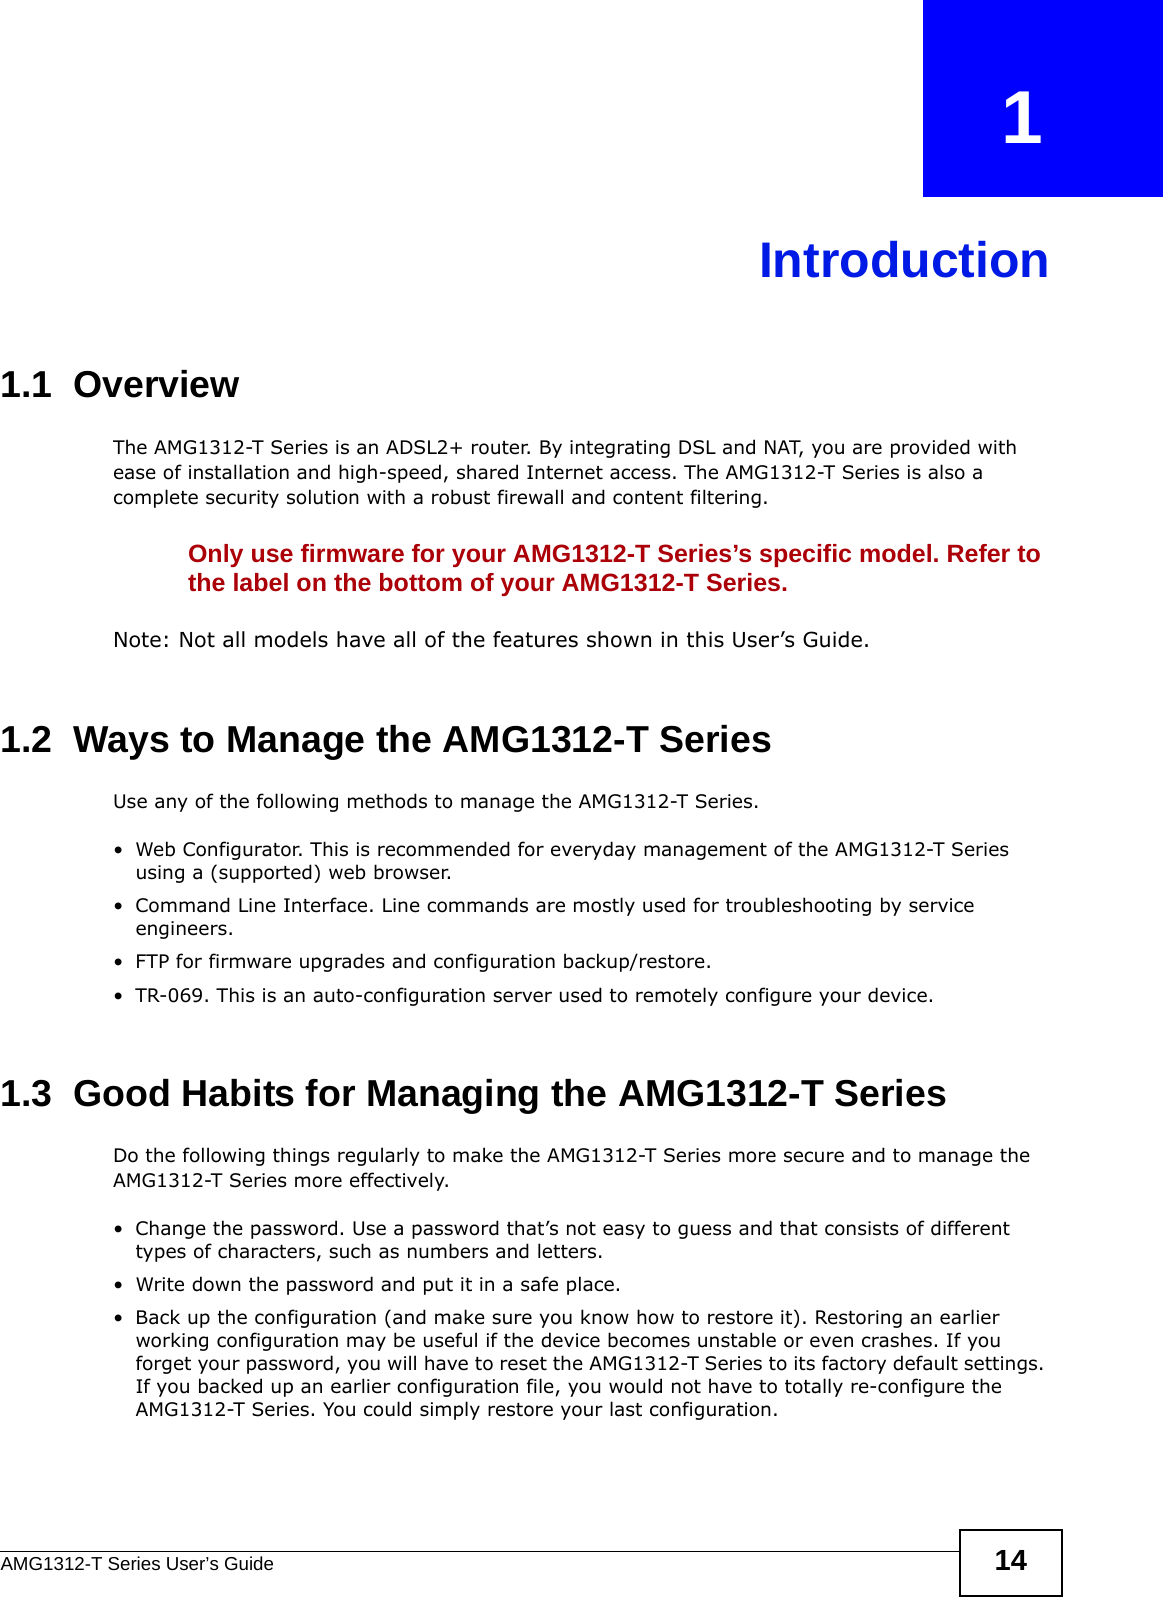 AMG1312-T Series User’s Guide 14CHAPTER   1Introduction1.1  OverviewThe AMG1312-T Series is an ADSL2+ router. By integrating DSL and NAT, you are provided with ease of installation and high-speed, shared Internet access. The AMG1312-T Series is also a complete security solution with a robust firewall and content filtering.Only use firmware for your AMG1312-T Series’s specific model. Refer to the label on the bottom of your AMG1312-T Series.Note: Not all models have all of the features shown in this User’s Guide.1.2  Ways to Manage the AMG1312-T SeriesUse any of the following methods to manage the AMG1312-T Series.• Web Configurator. This is recommended for everyday management of the AMG1312-T Series using a (supported) web browser.• Command Line Interface. Line commands are mostly used for troubleshooting by service engineers.• FTP for firmware upgrades and configuration backup/restore.• TR-069. This is an auto-configuration server used to remotely configure your device.1.3  Good Habits for Managing the AMG1312-T SeriesDo the following things regularly to make the AMG1312-T Series more secure and to manage the AMG1312-T Series more effectively.• Change the password. Use a password that’s not easy to guess and that consists of different types of characters, such as numbers and letters.• Write down the password and put it in a safe place.• Back up the configuration (and make sure you know how to restore it). Restoring an earlier working configuration may be useful if the device becomes unstable or even crashes. If you forget your password, you will have to reset the AMG1312-T Series to its factory default settings. If you backed up an earlier configuration file, you would not have to totally re-configure the AMG1312-T Series. You could simply restore your last configuration.